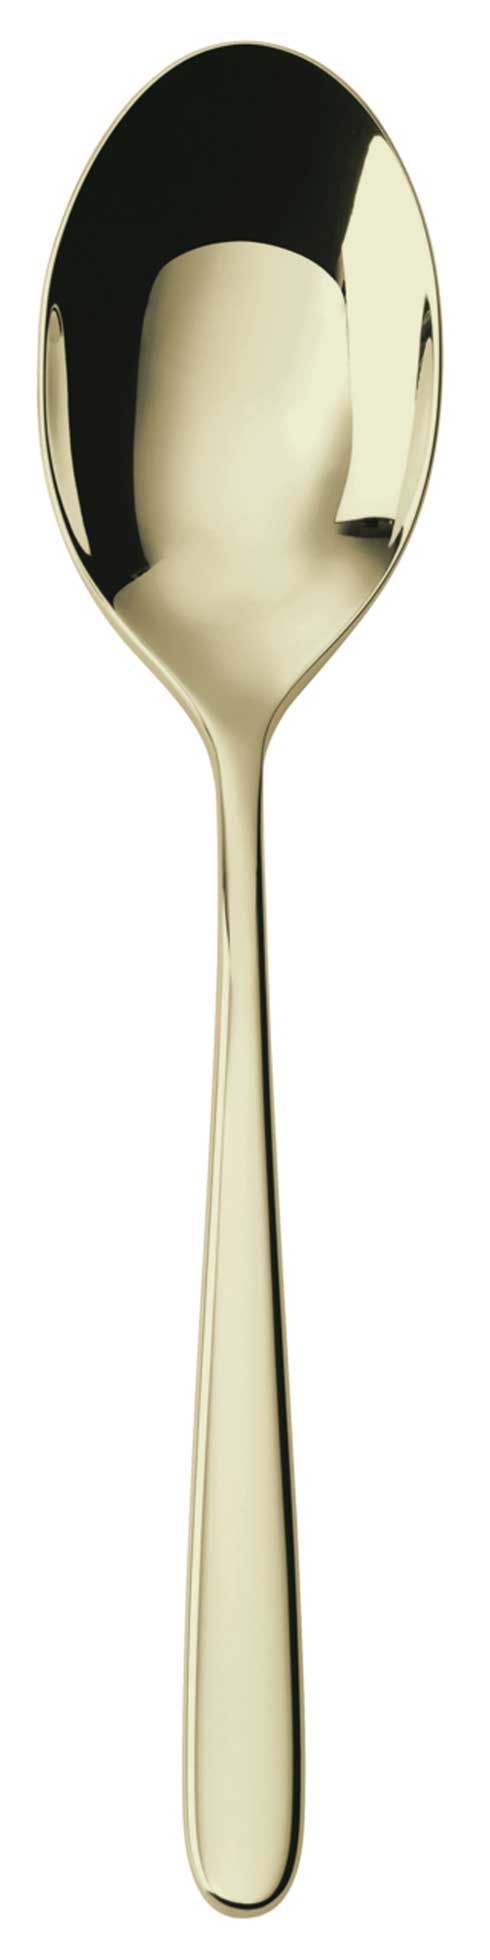 Champagne - Serving Spoon on 18/10 s/s - PVD Champagne - $57.00